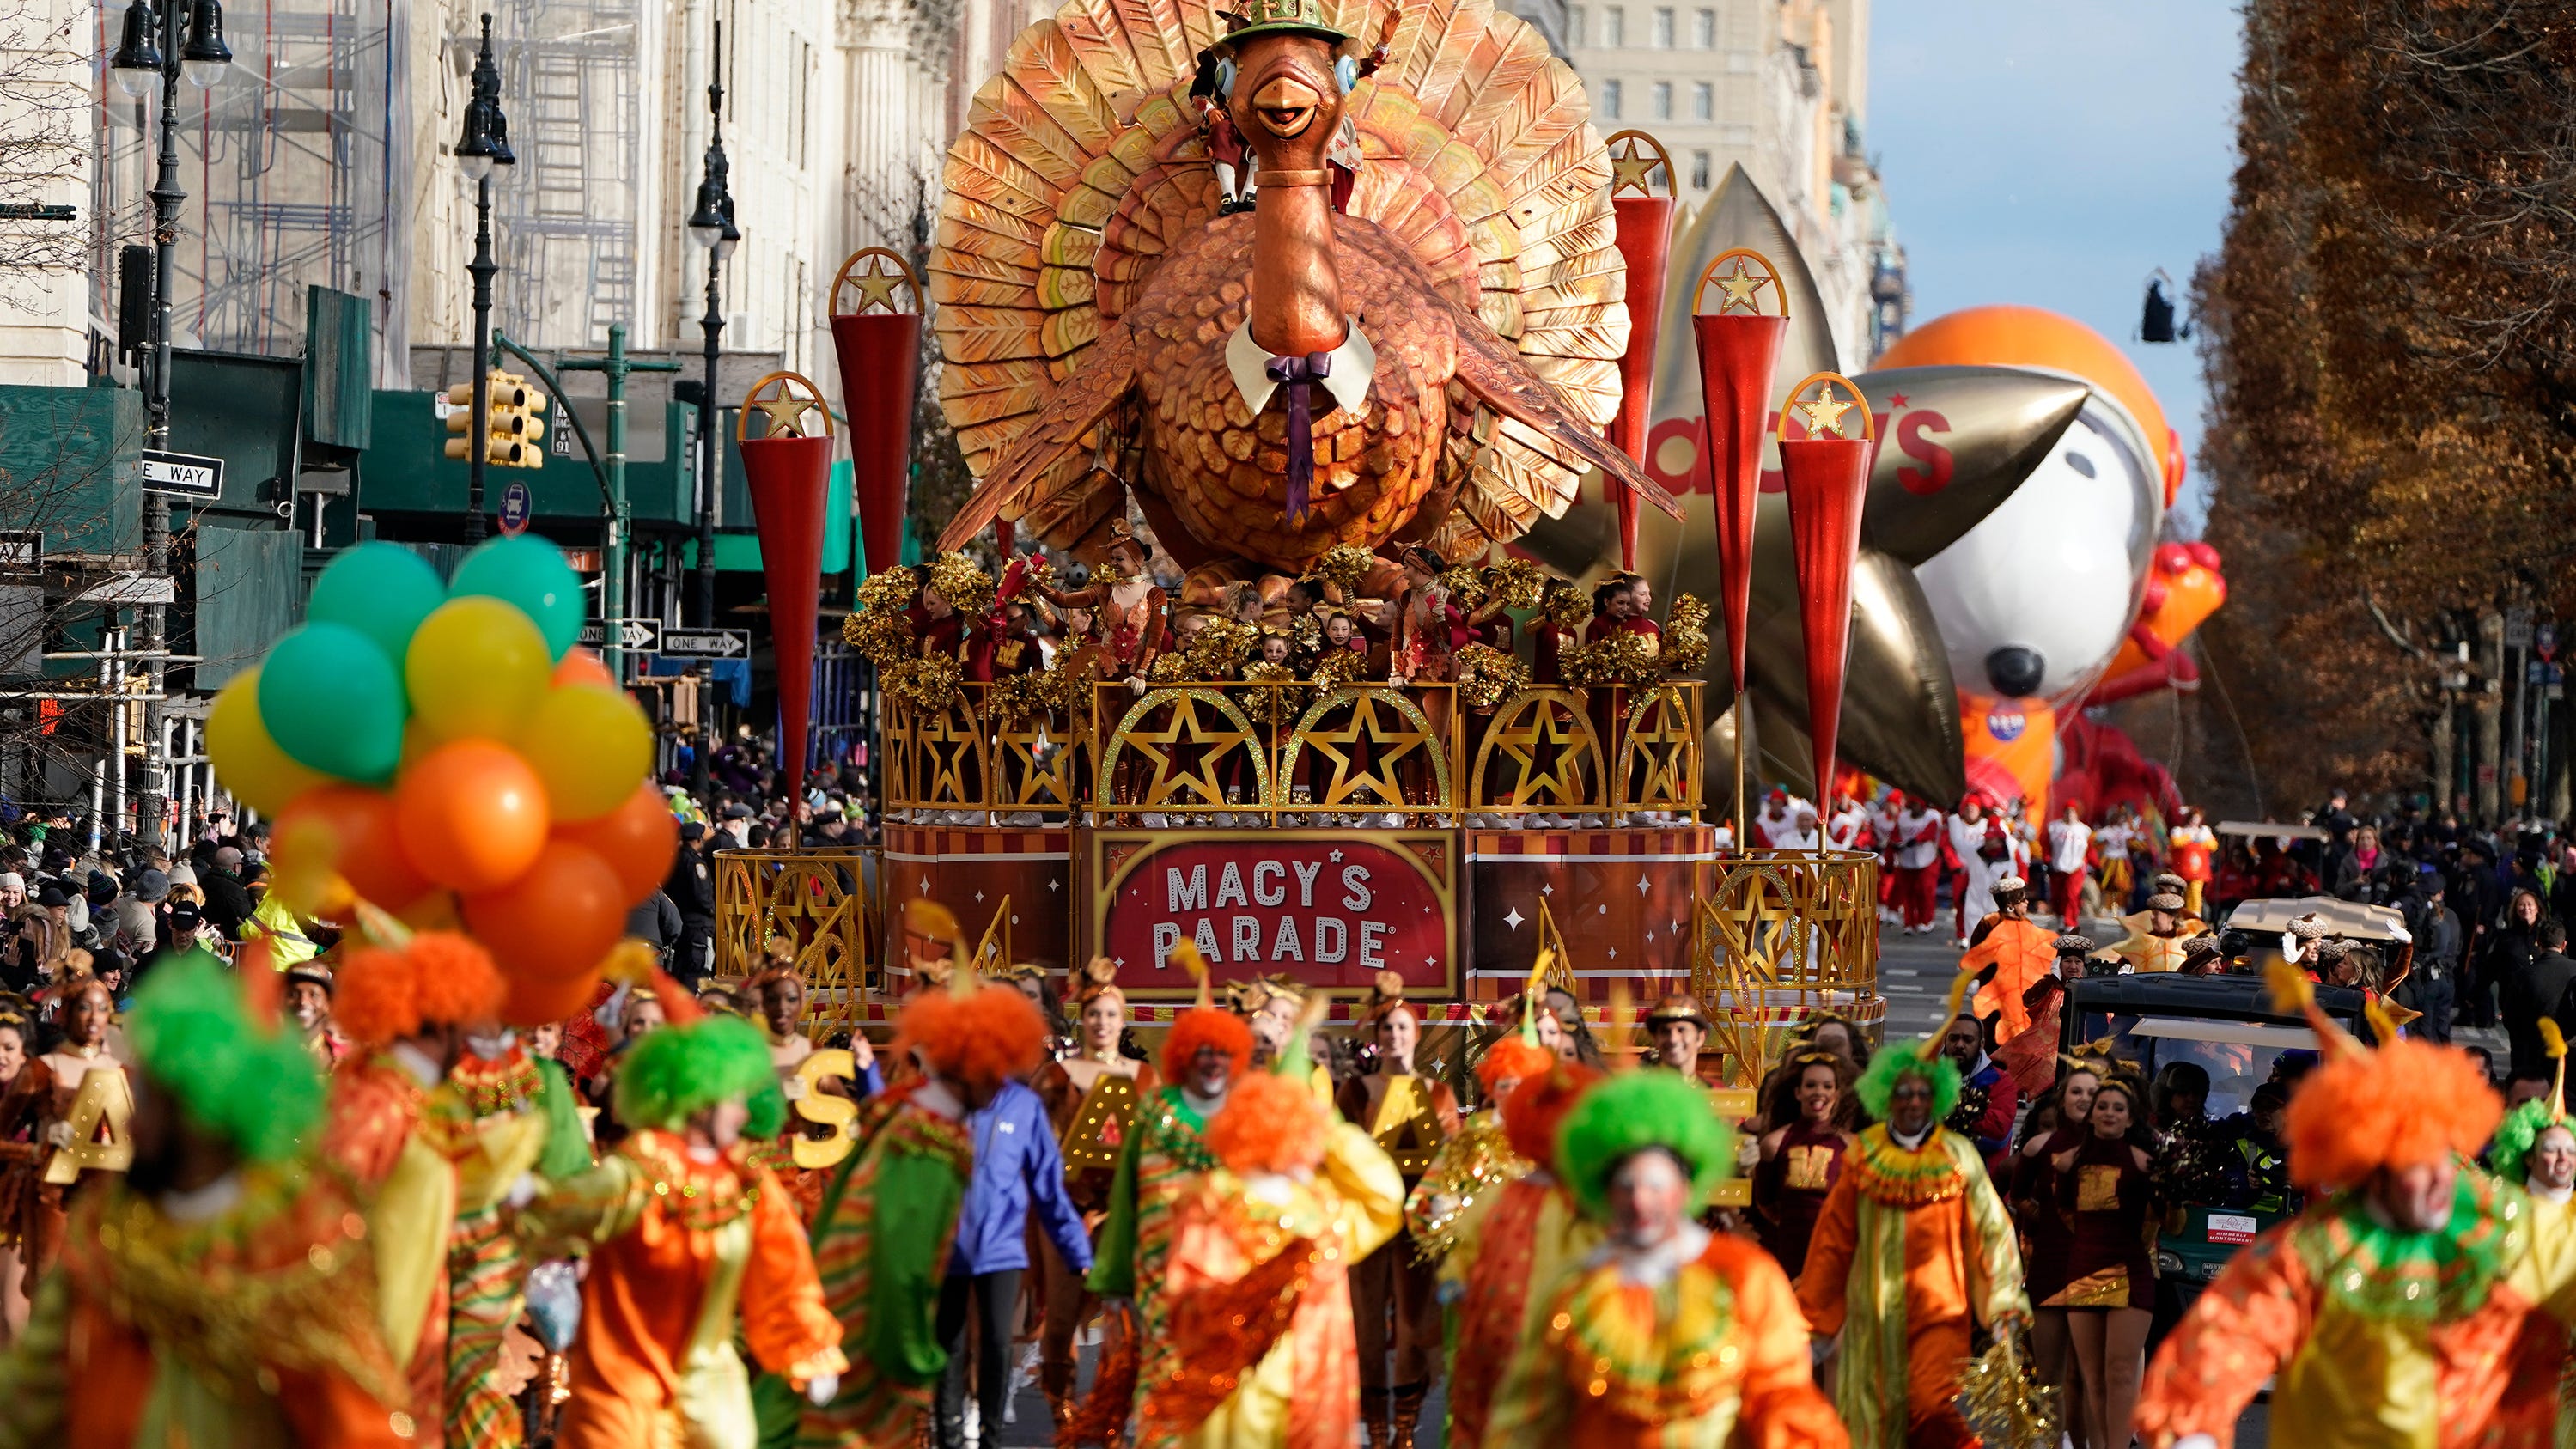 Macy's parade 2020: What time and how to watch ...